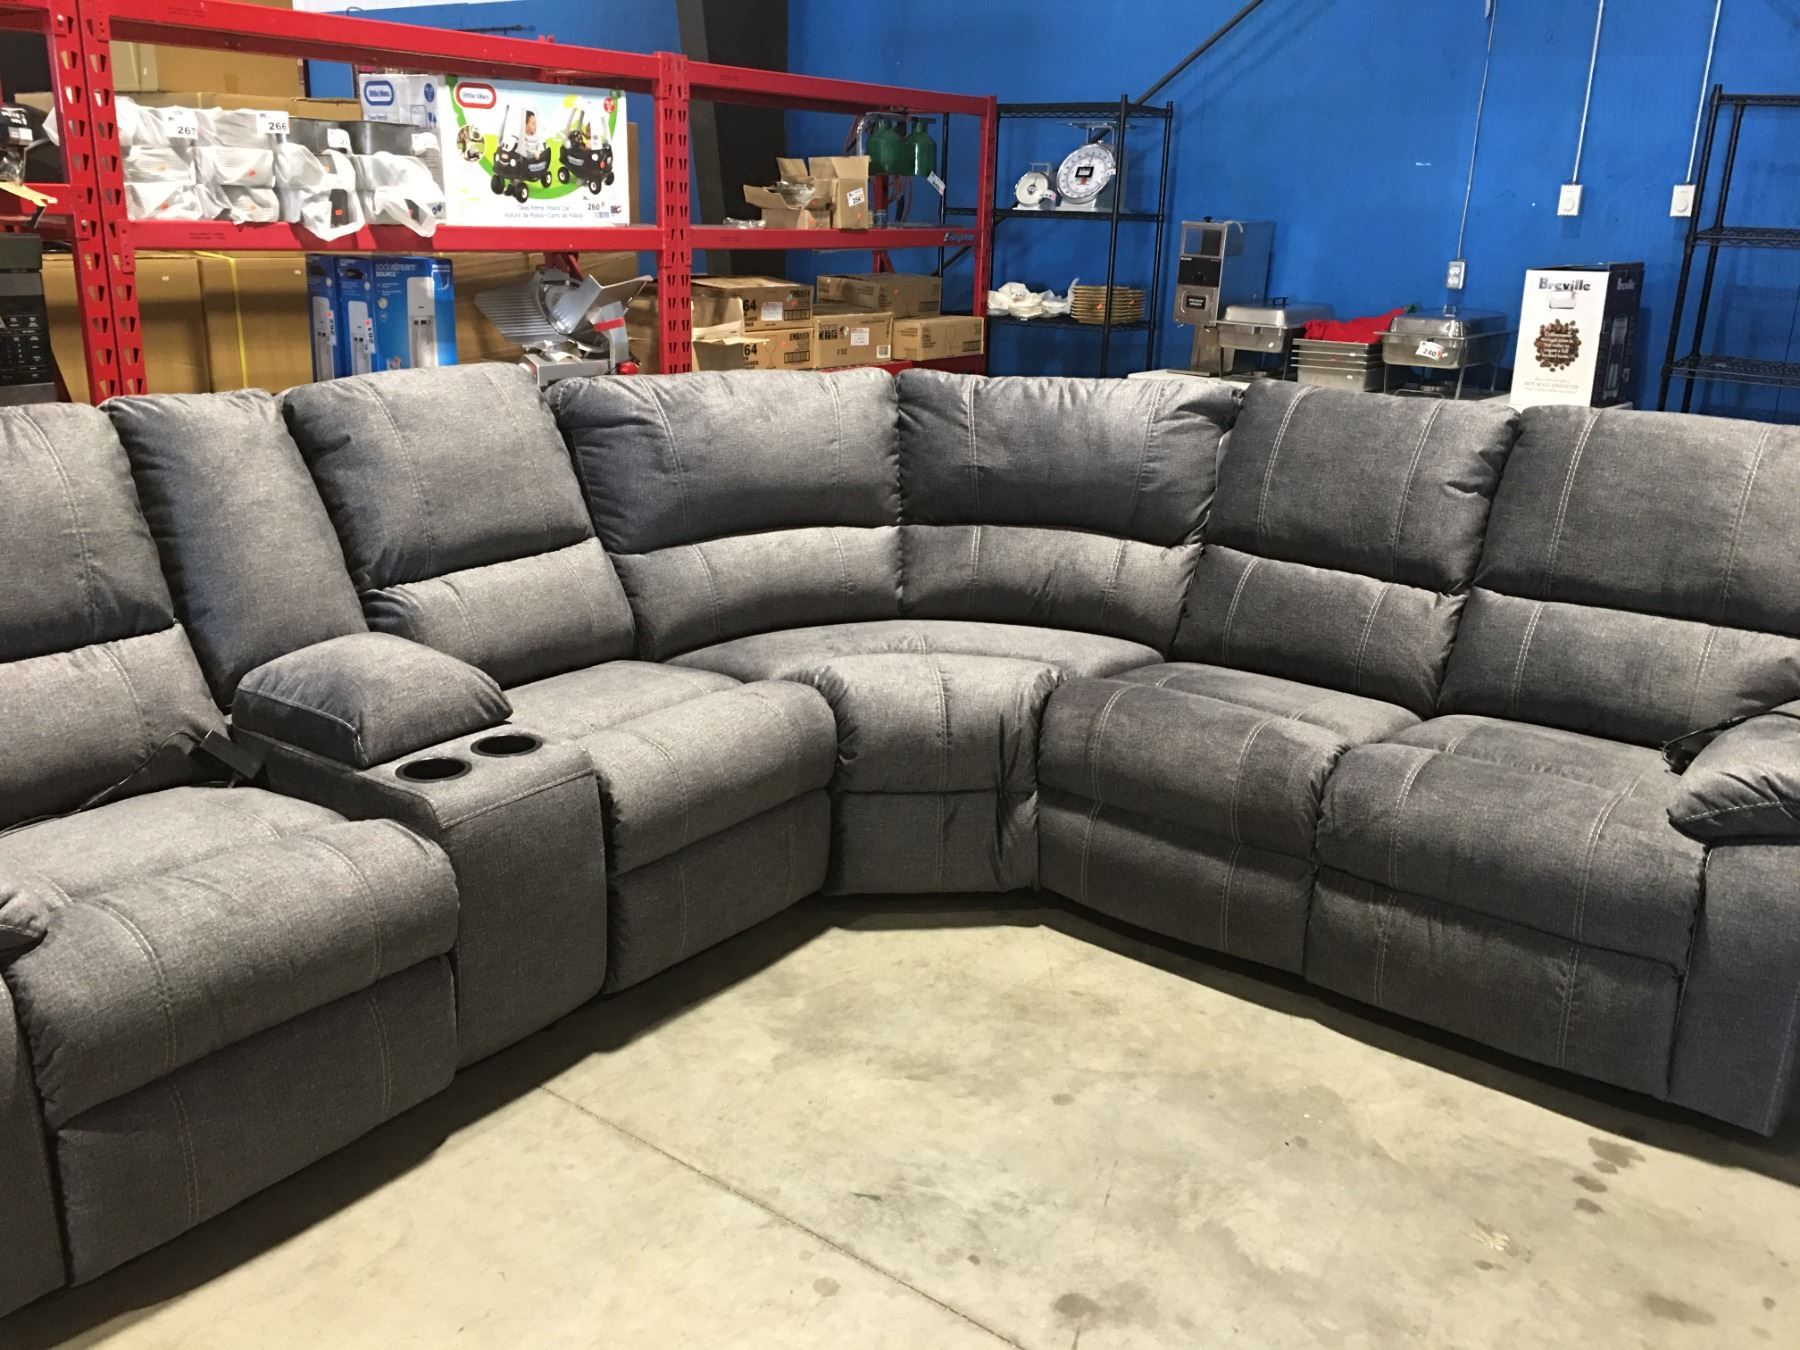 Signature Designashley Dark Grey Upholstered Power Recliner Intended For Dark Gray Sectional Sofas (View 20 of 20)